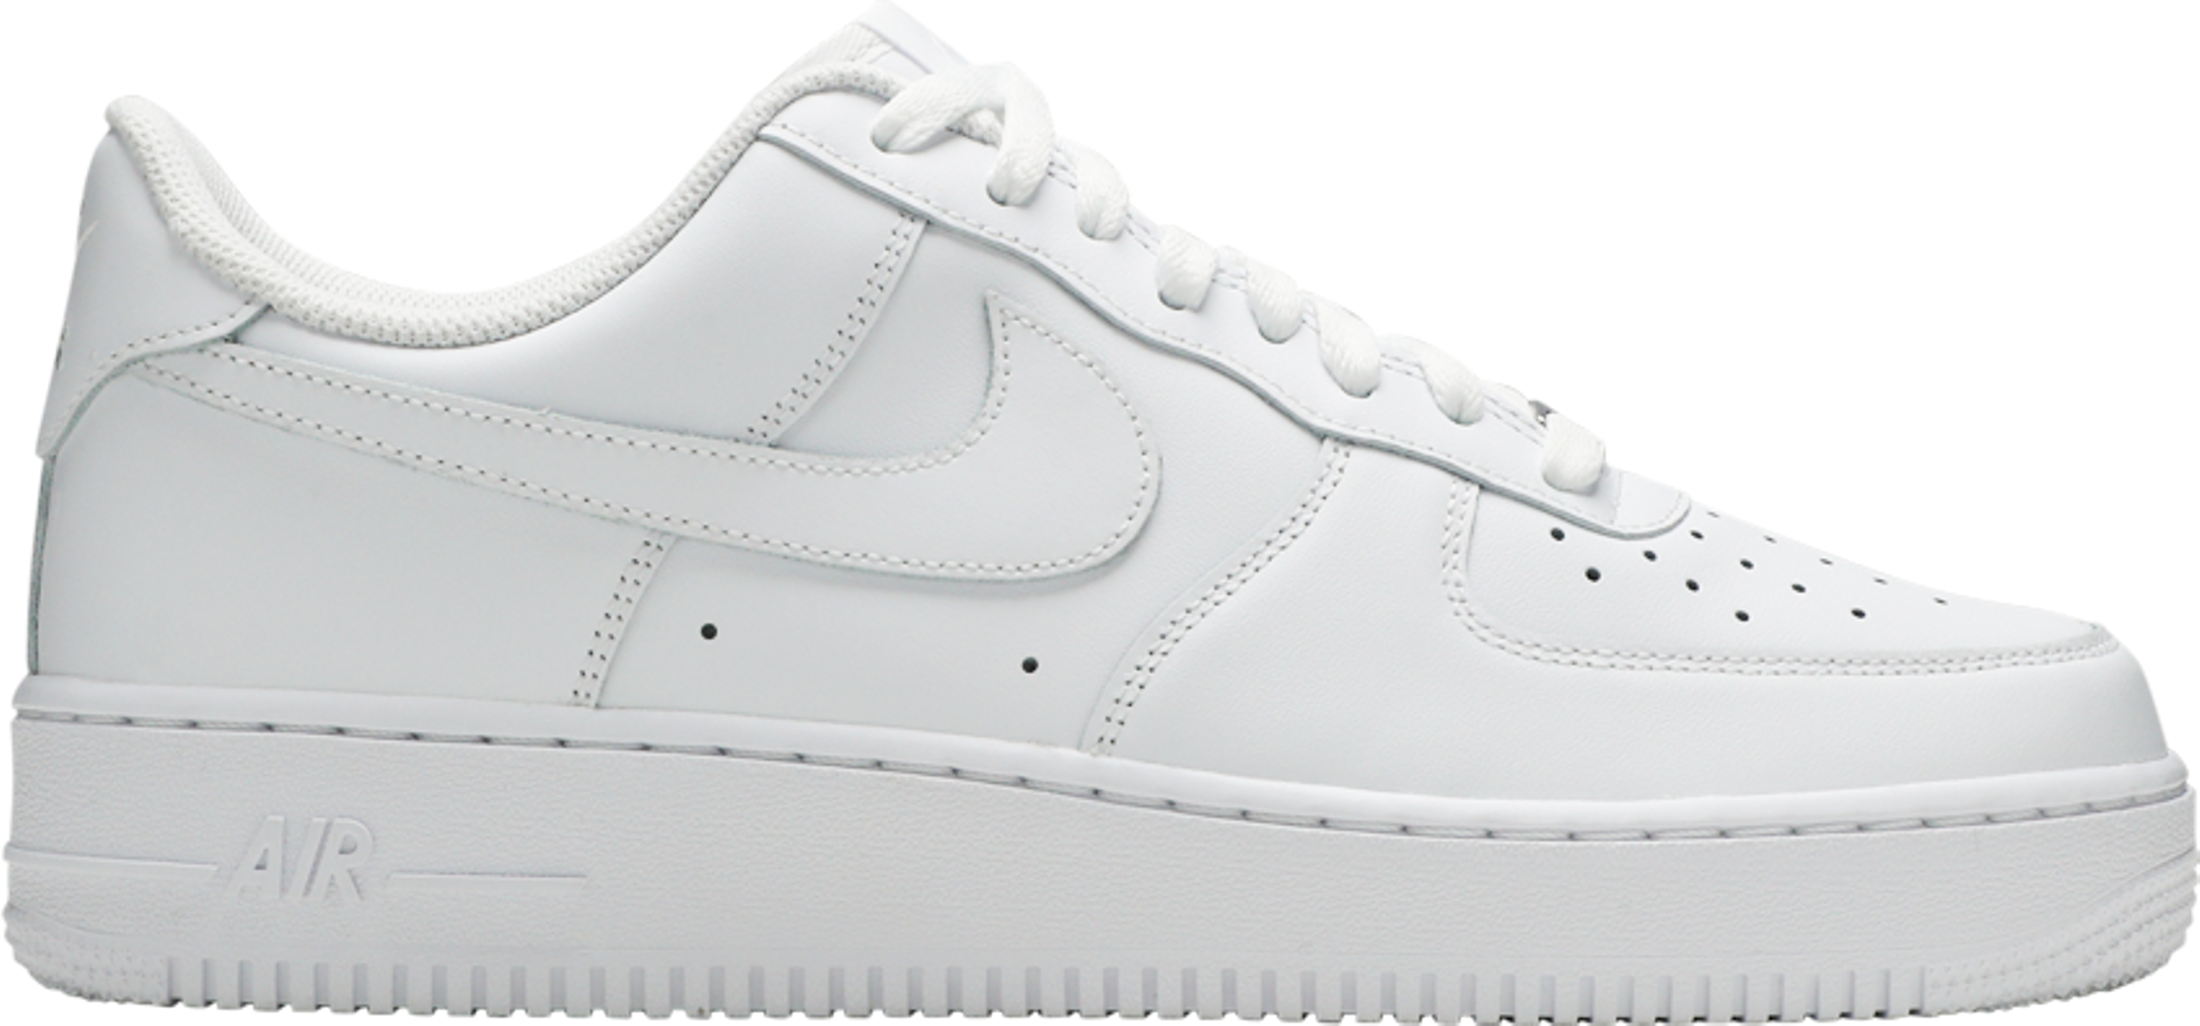 Size 8 - Nike Air Force 1 Triple White - CW2288-111 Brand New With Box